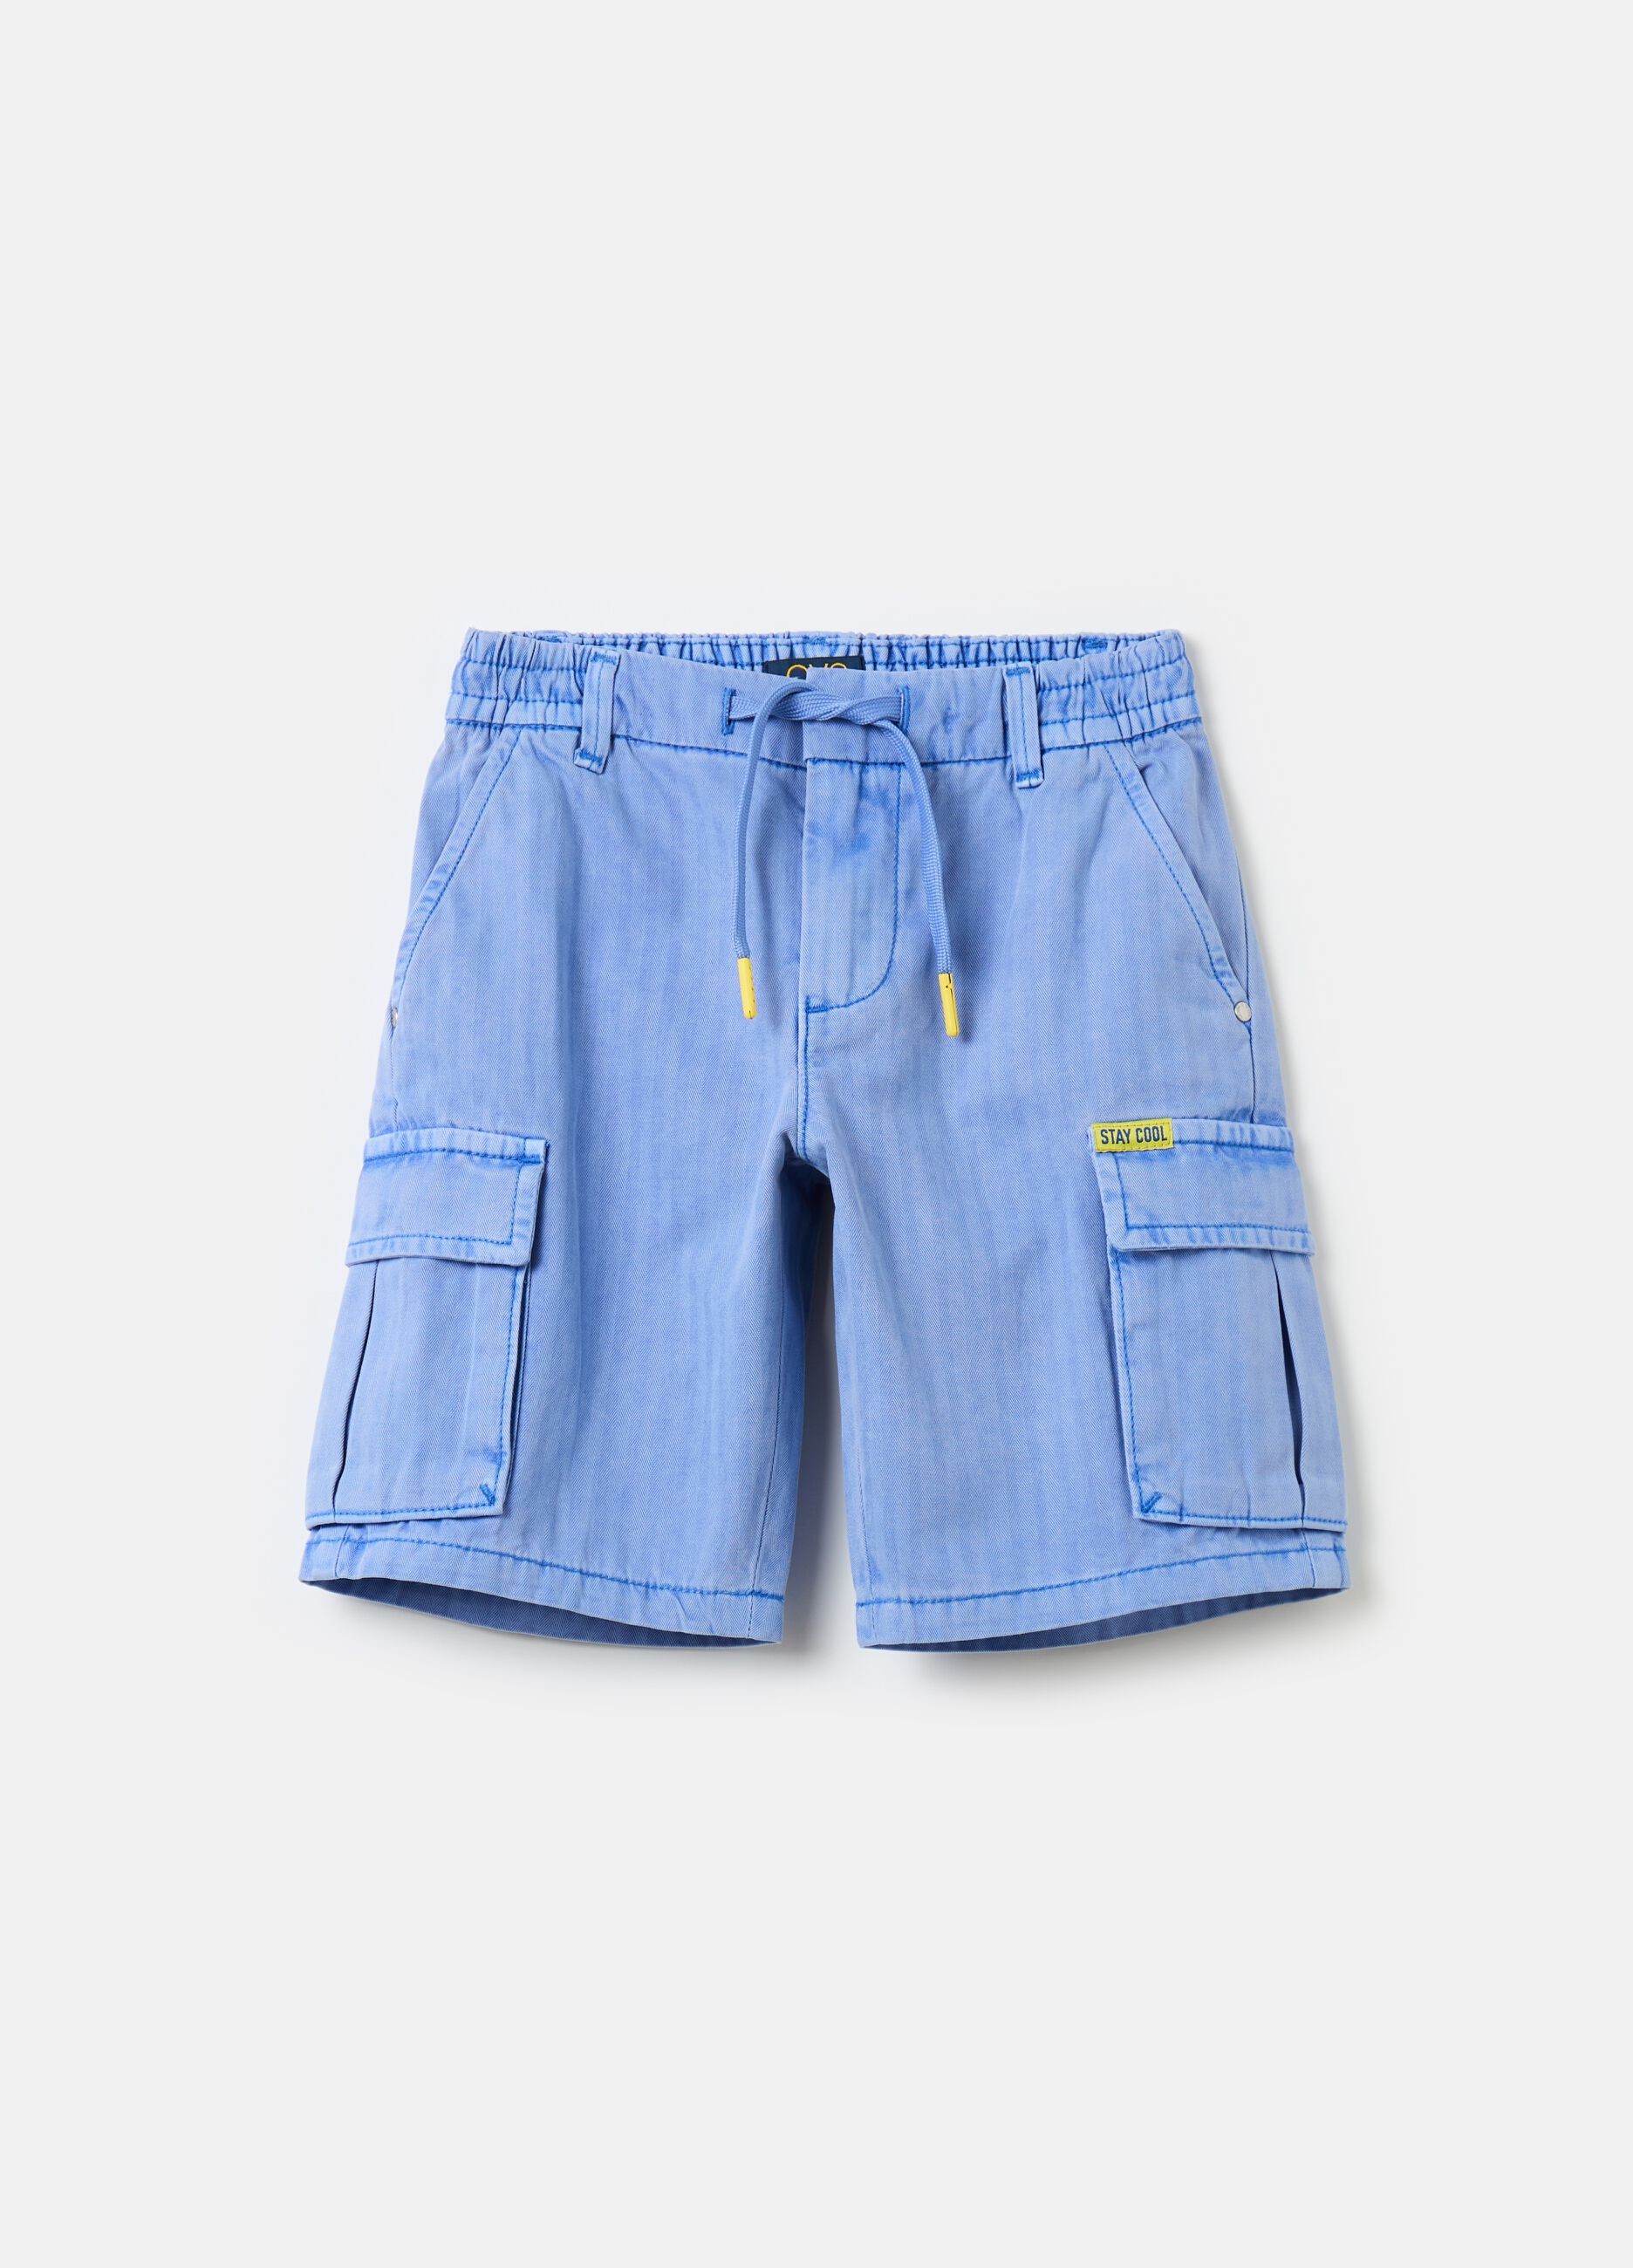 Cargo Bermuda shorts with striped weave